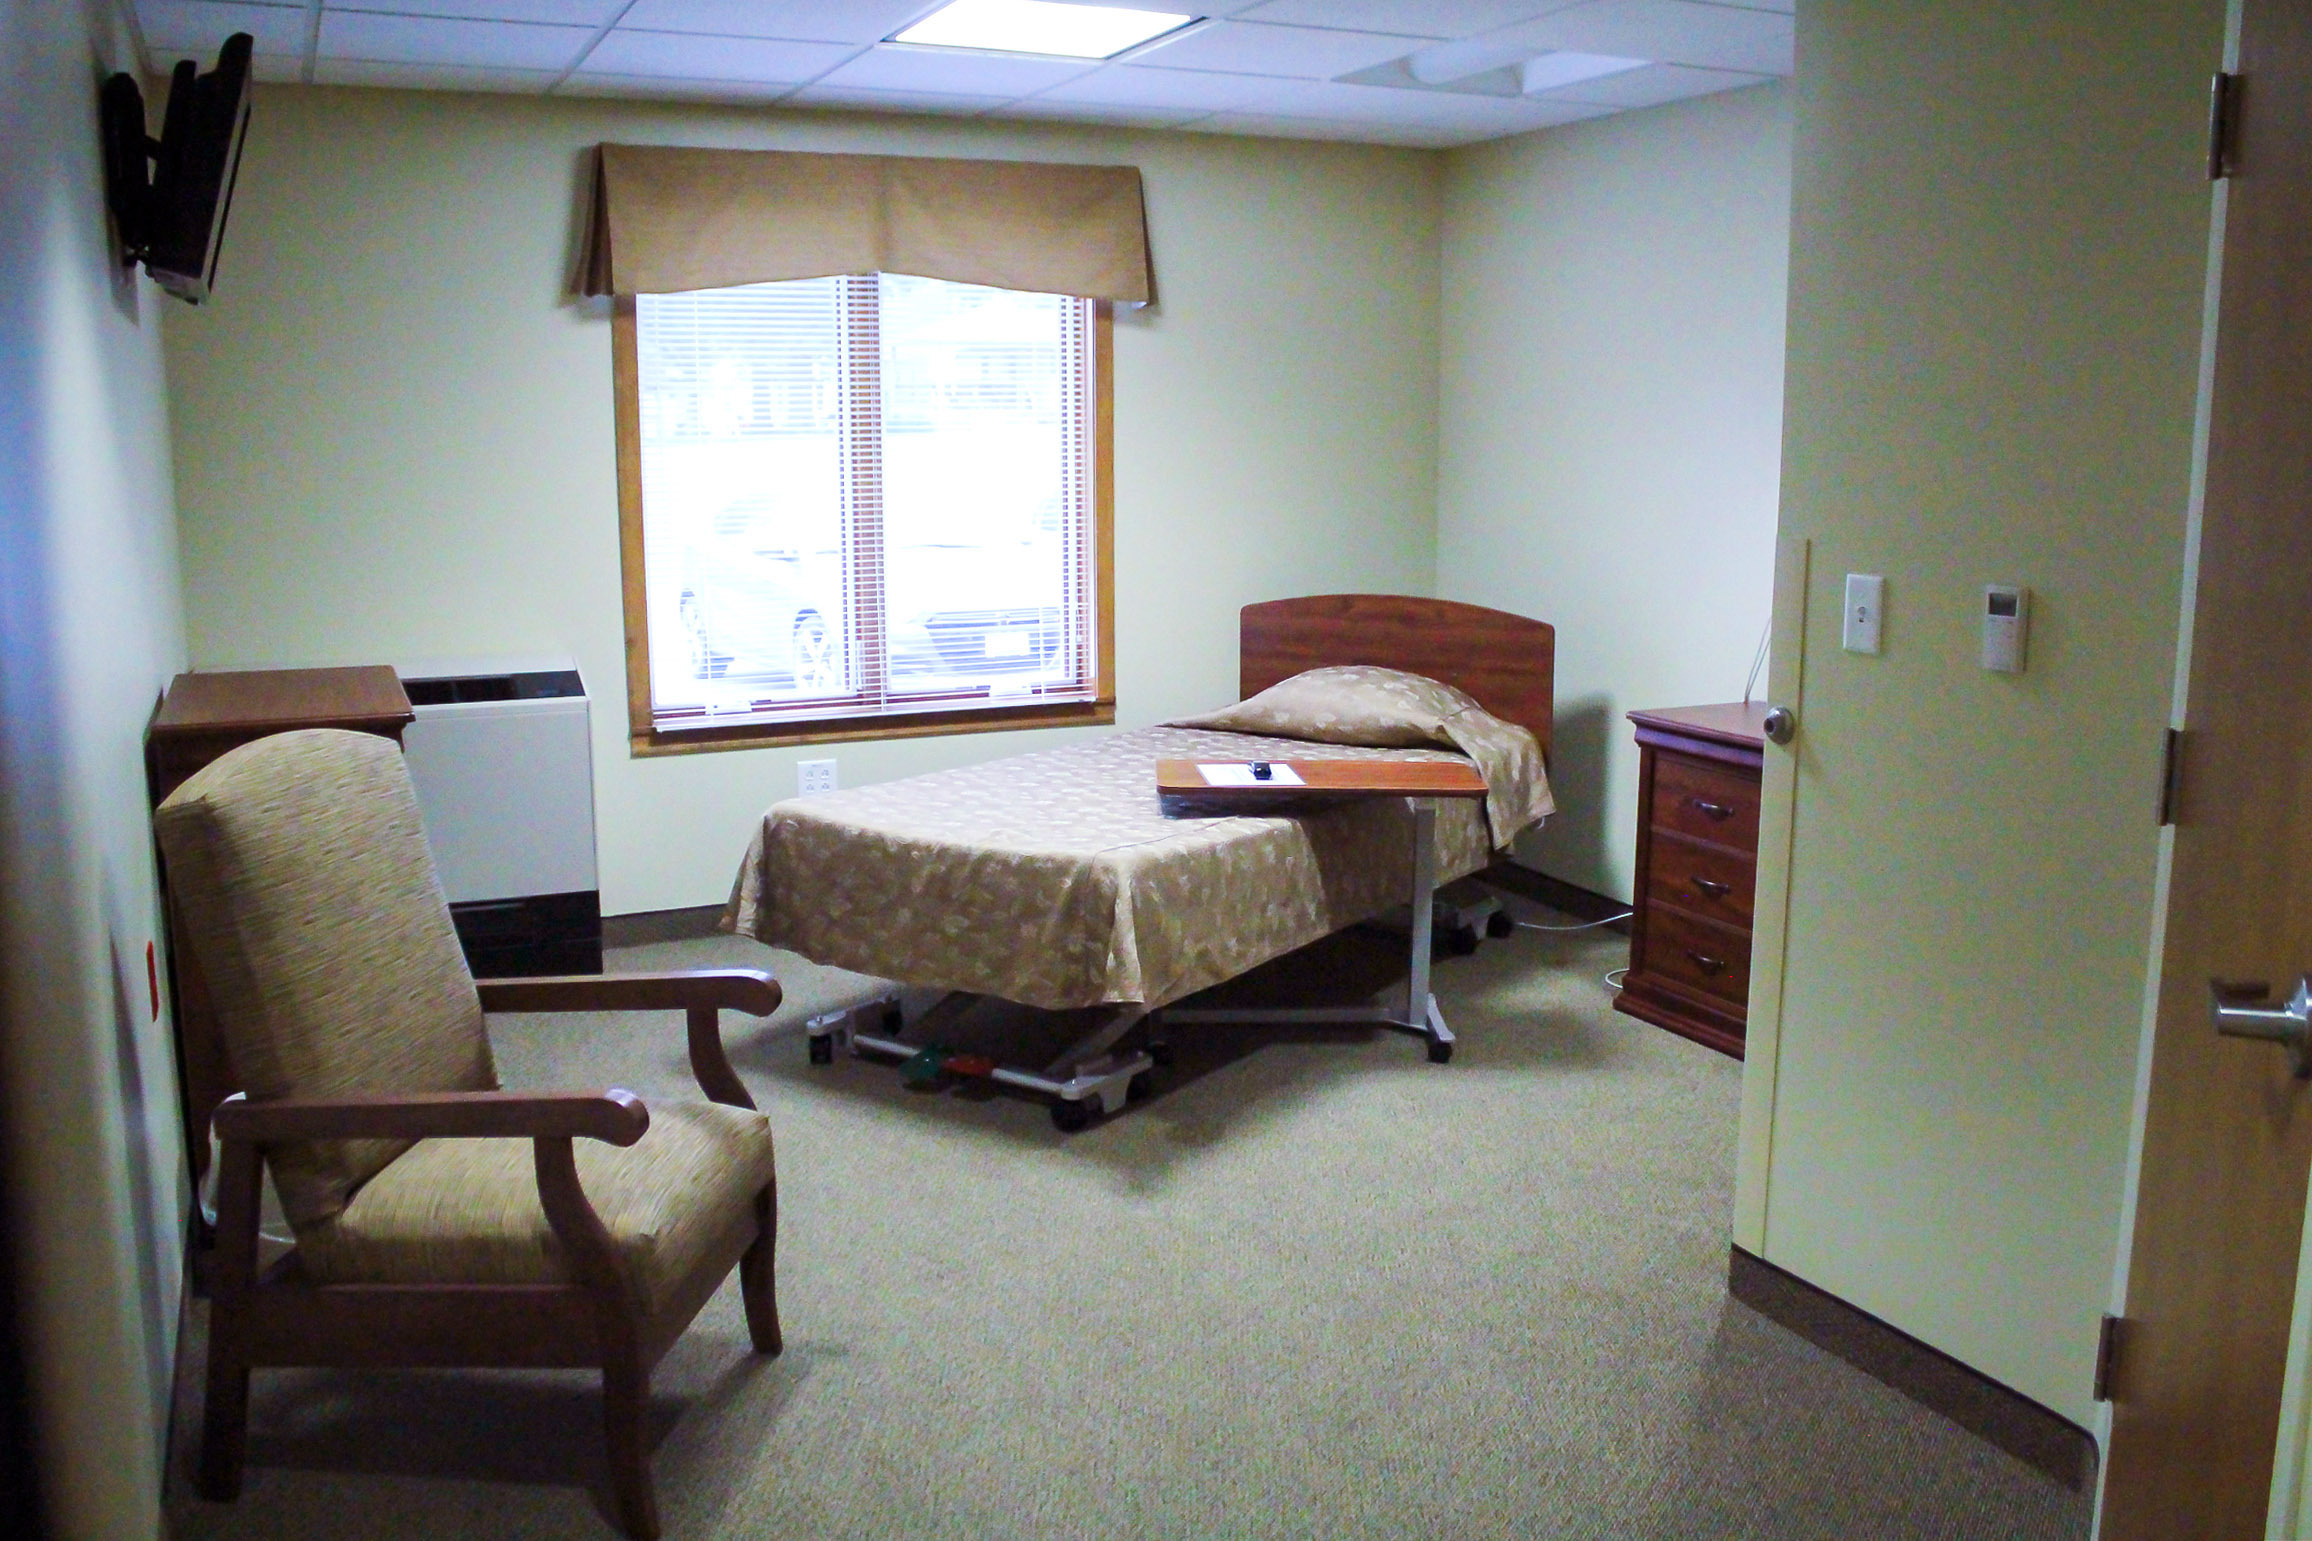 Private resident rooms are available for rehab patients at Good Samaritan Society - Beatrice in Beatrice, Nebraska.